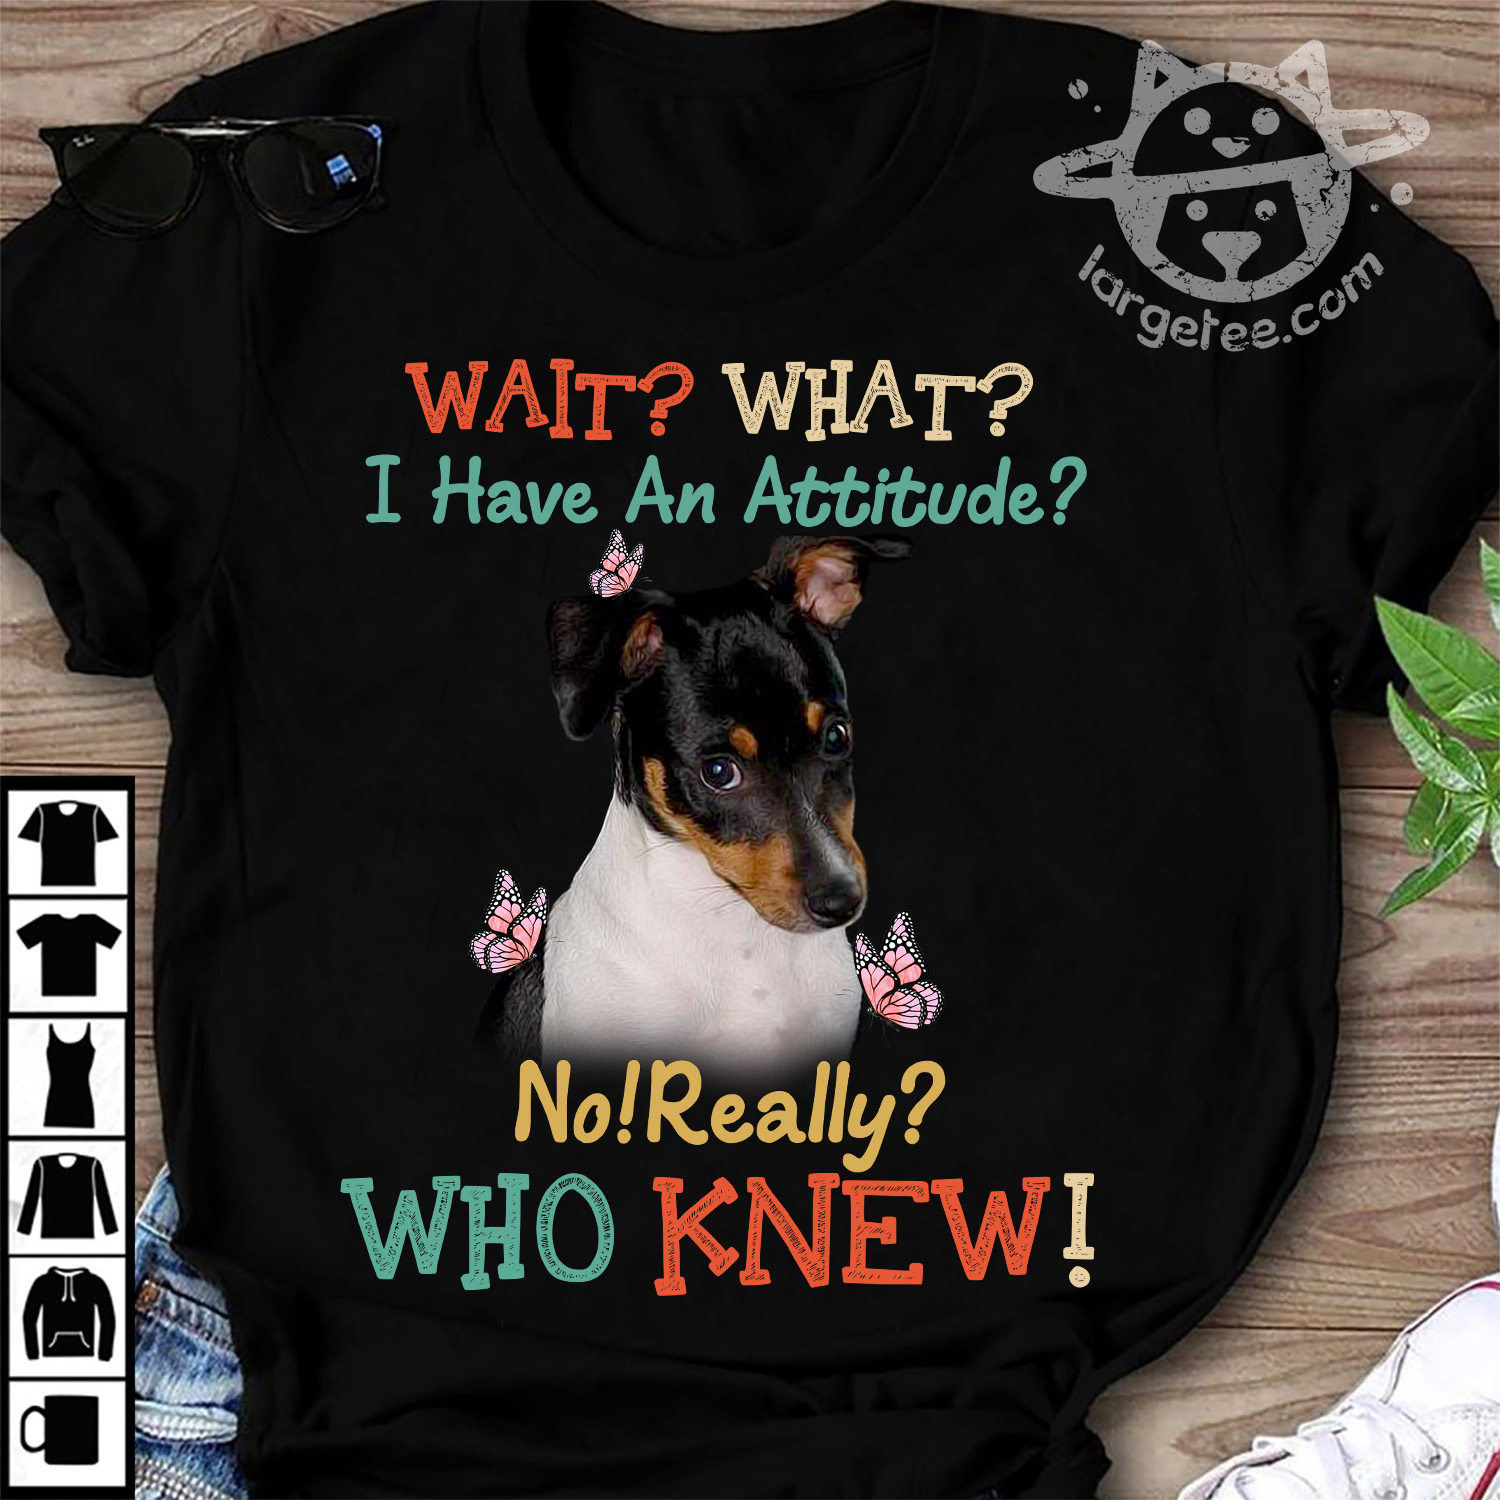 I have an attitude - Toy Fox Terrier dog